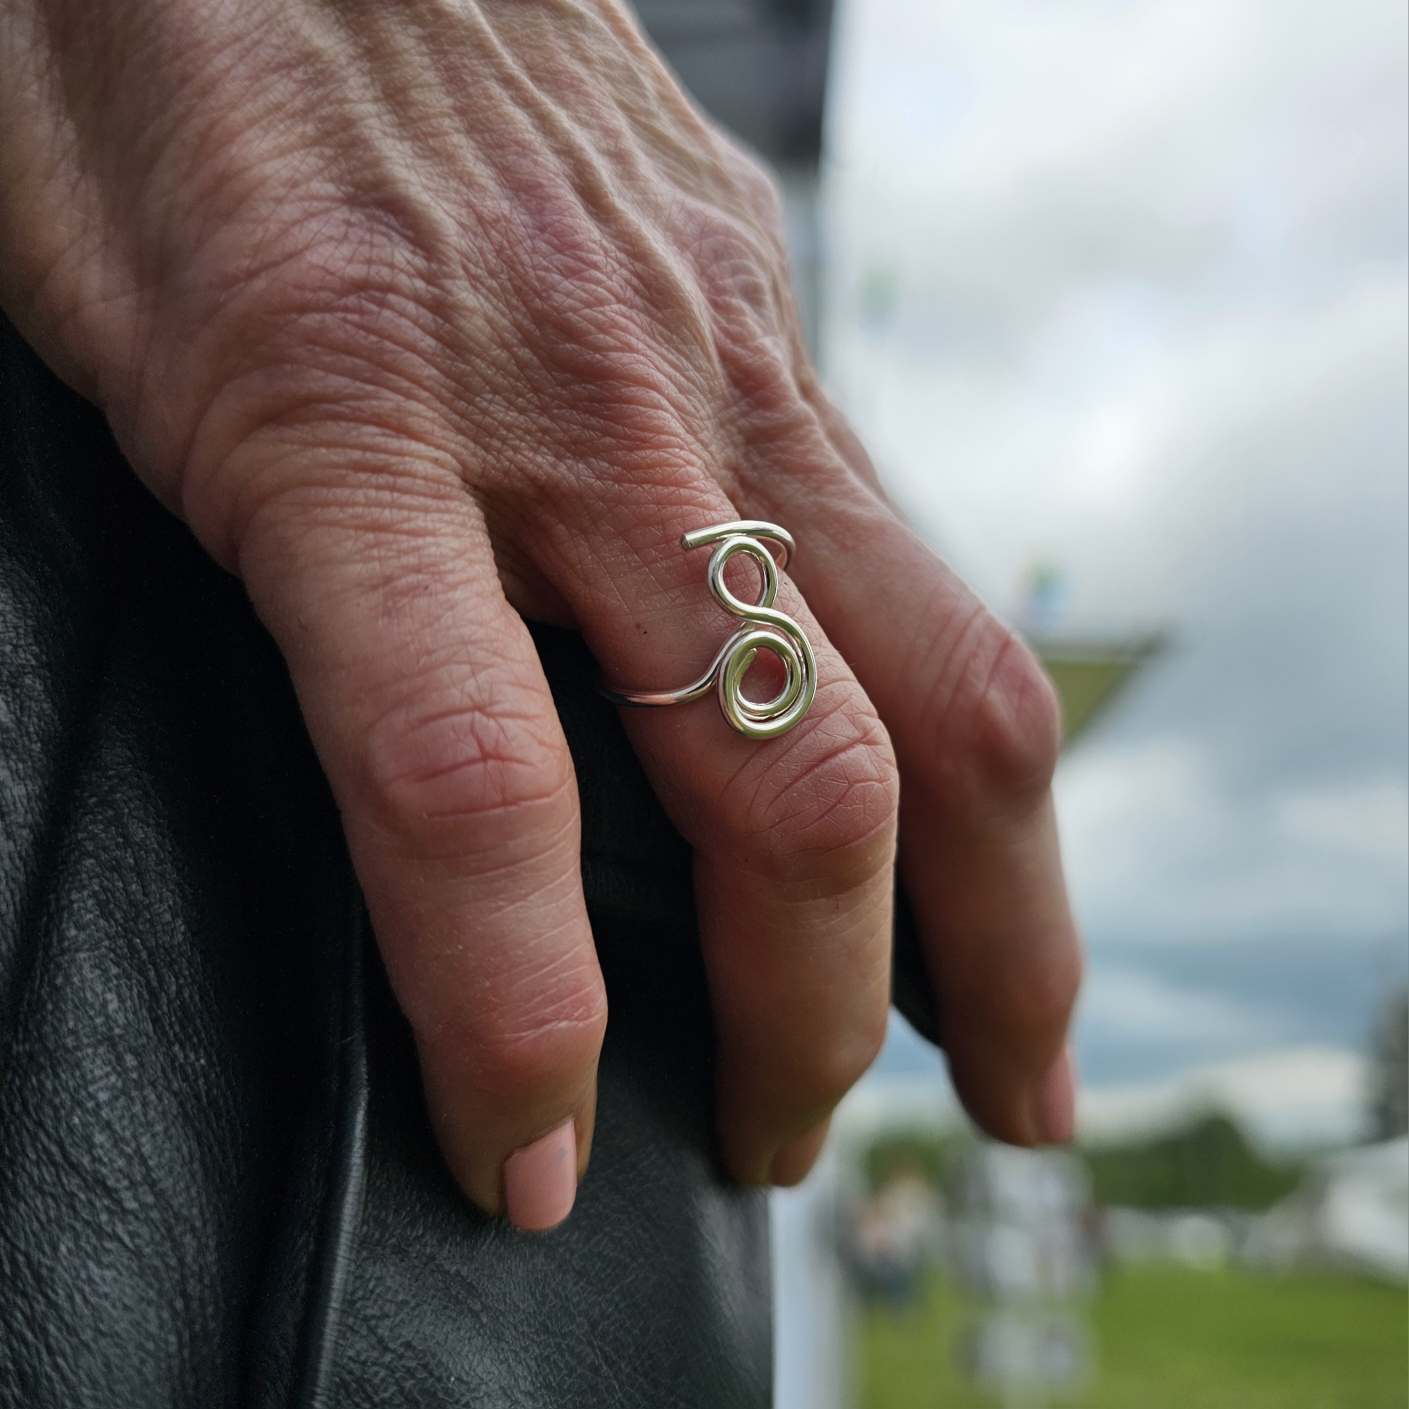 Jaclyn Nicole Silver Gratitude Ring on woman's hand